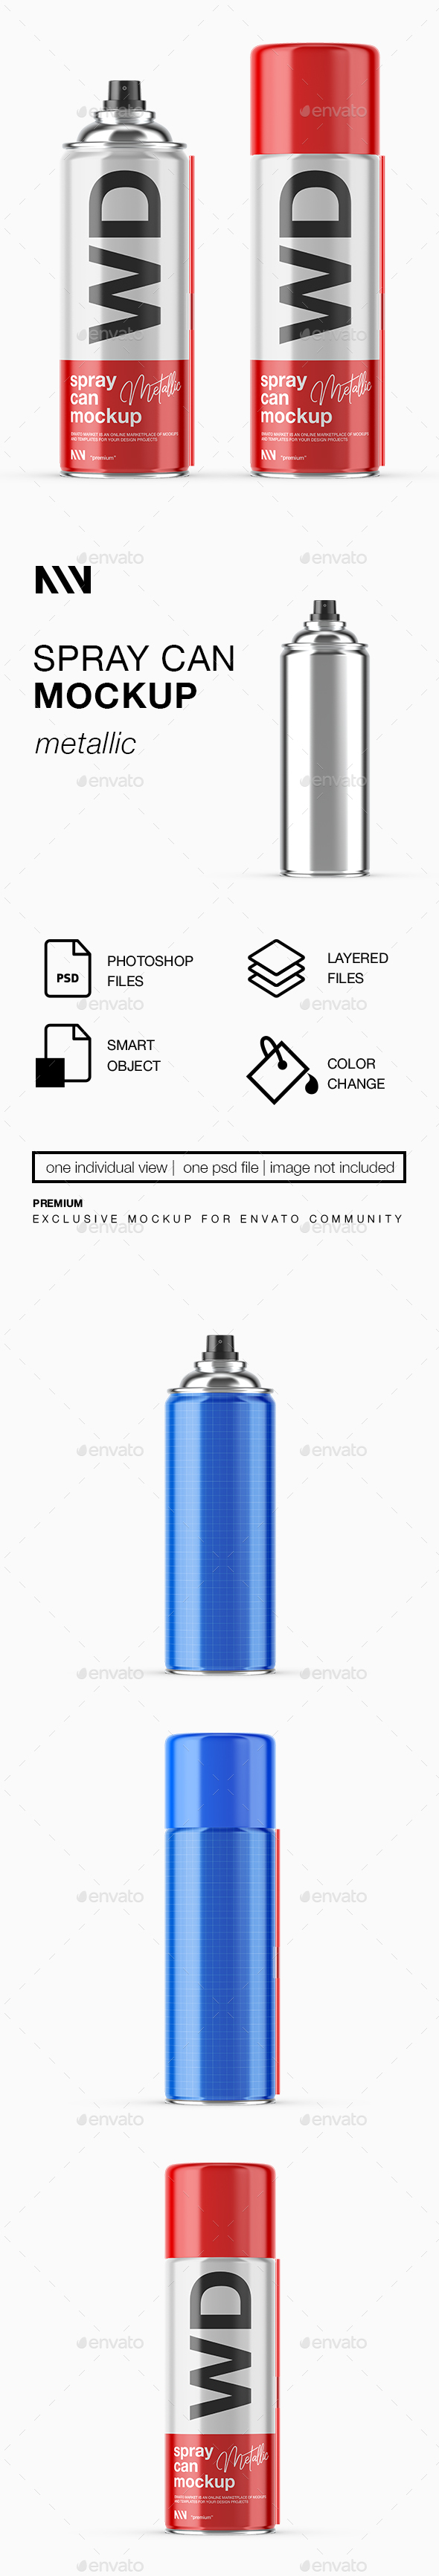 [DOWNLOAD]Spray Can Mockup